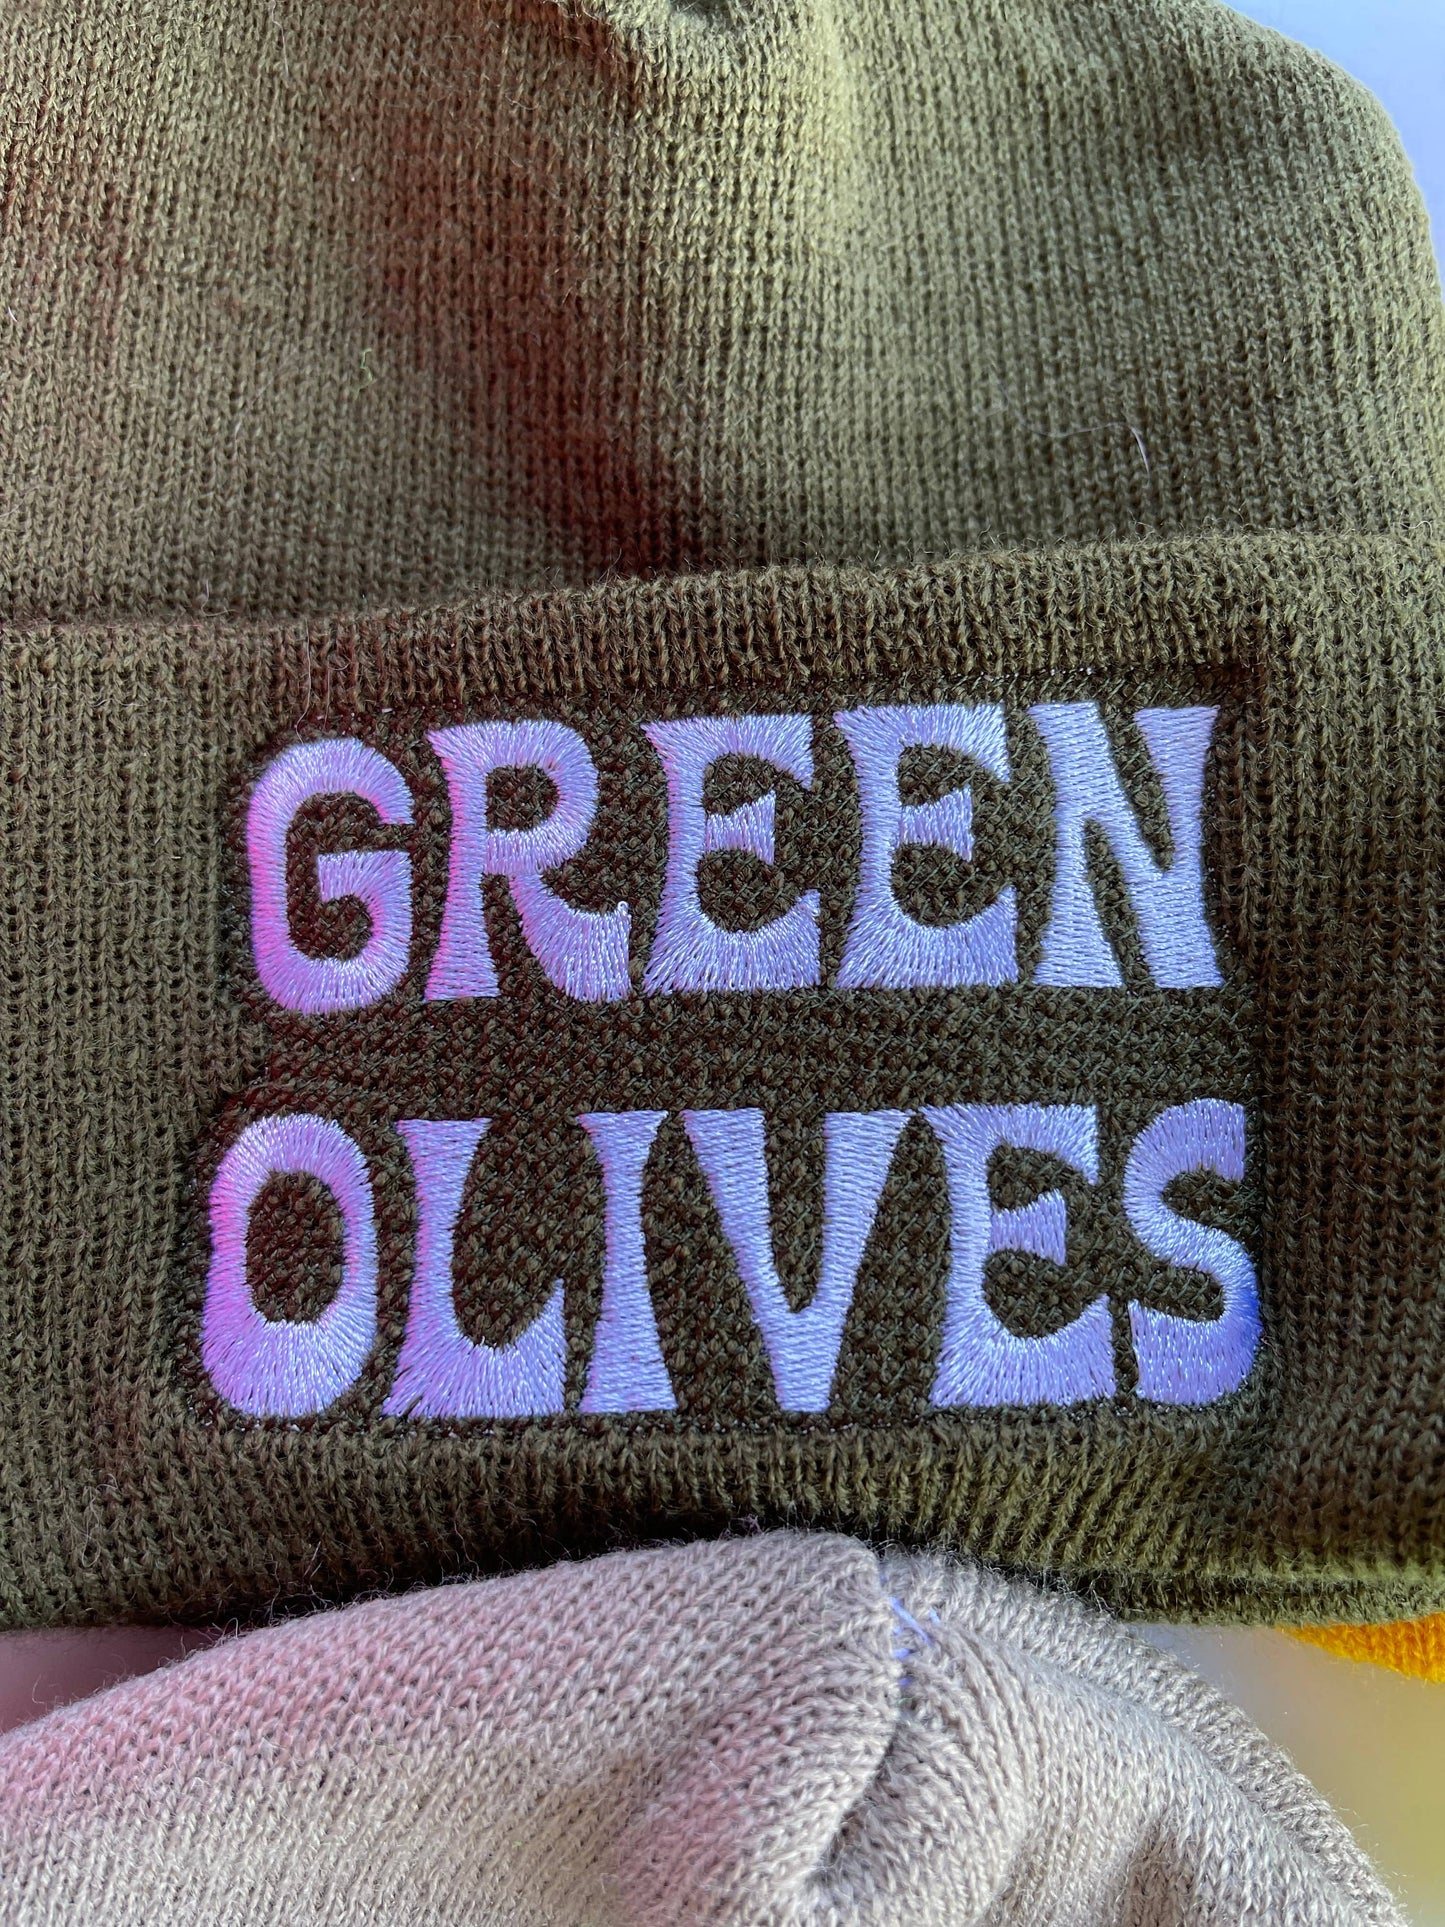 close up of white embroidered text that reads "Green Olives" on olive green beanie 